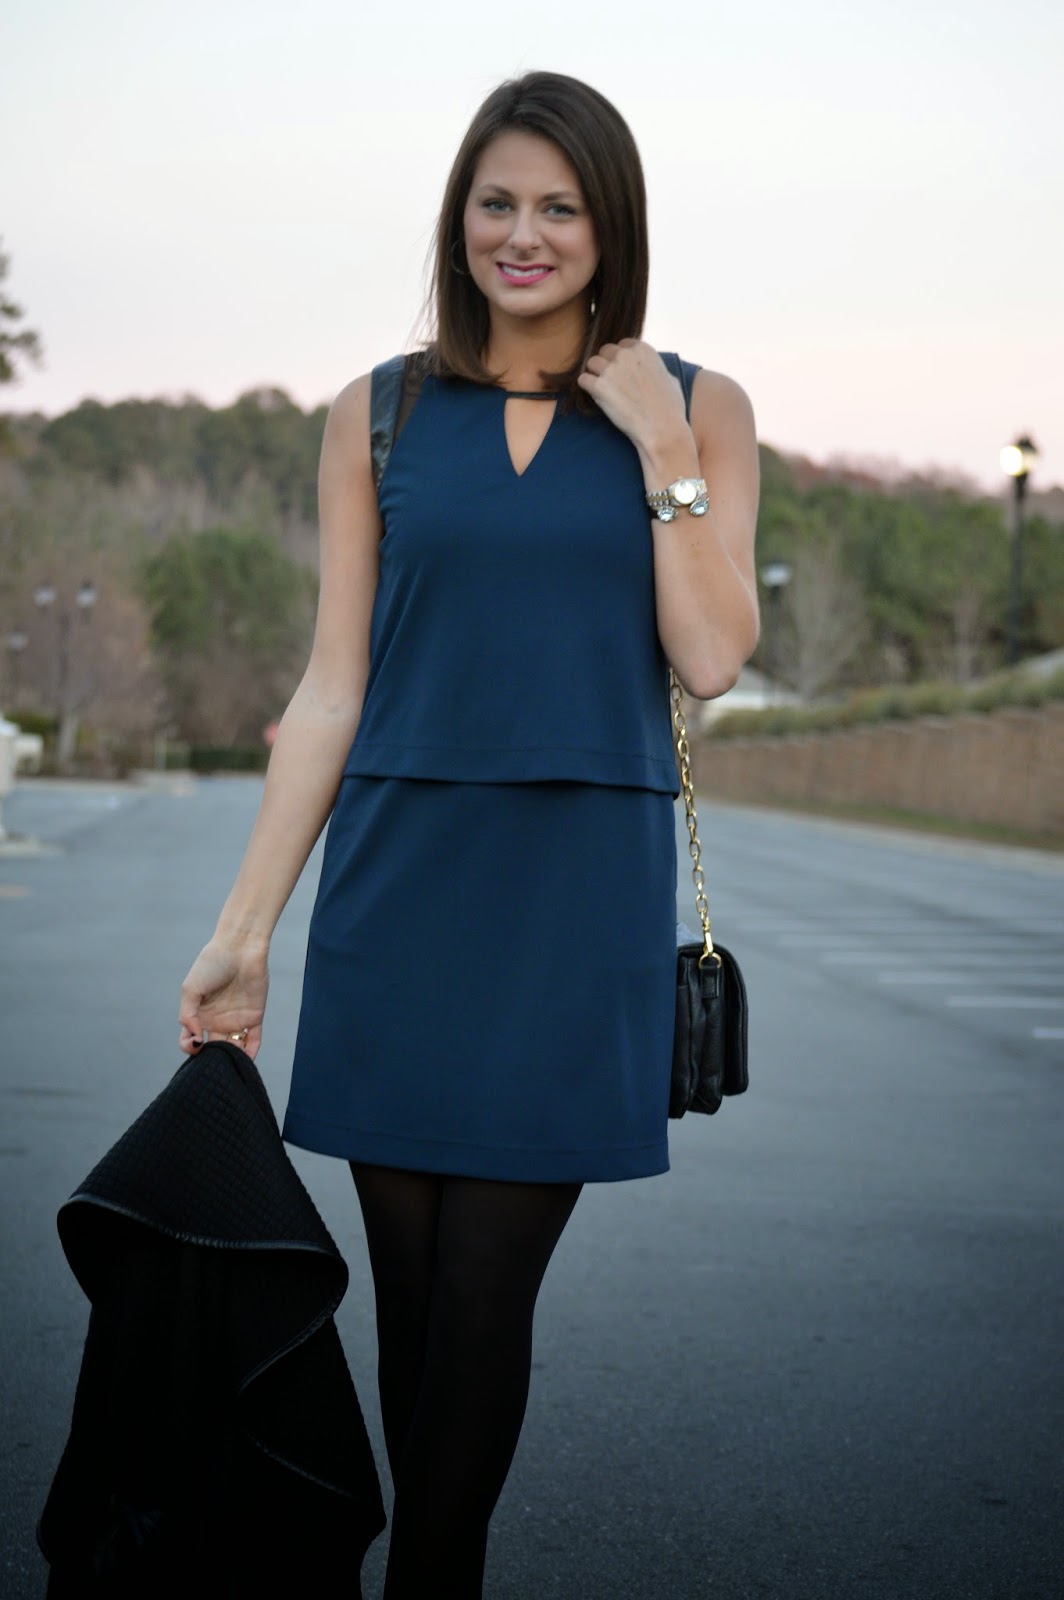 Black and Blue | Southern Style | a life + style blog